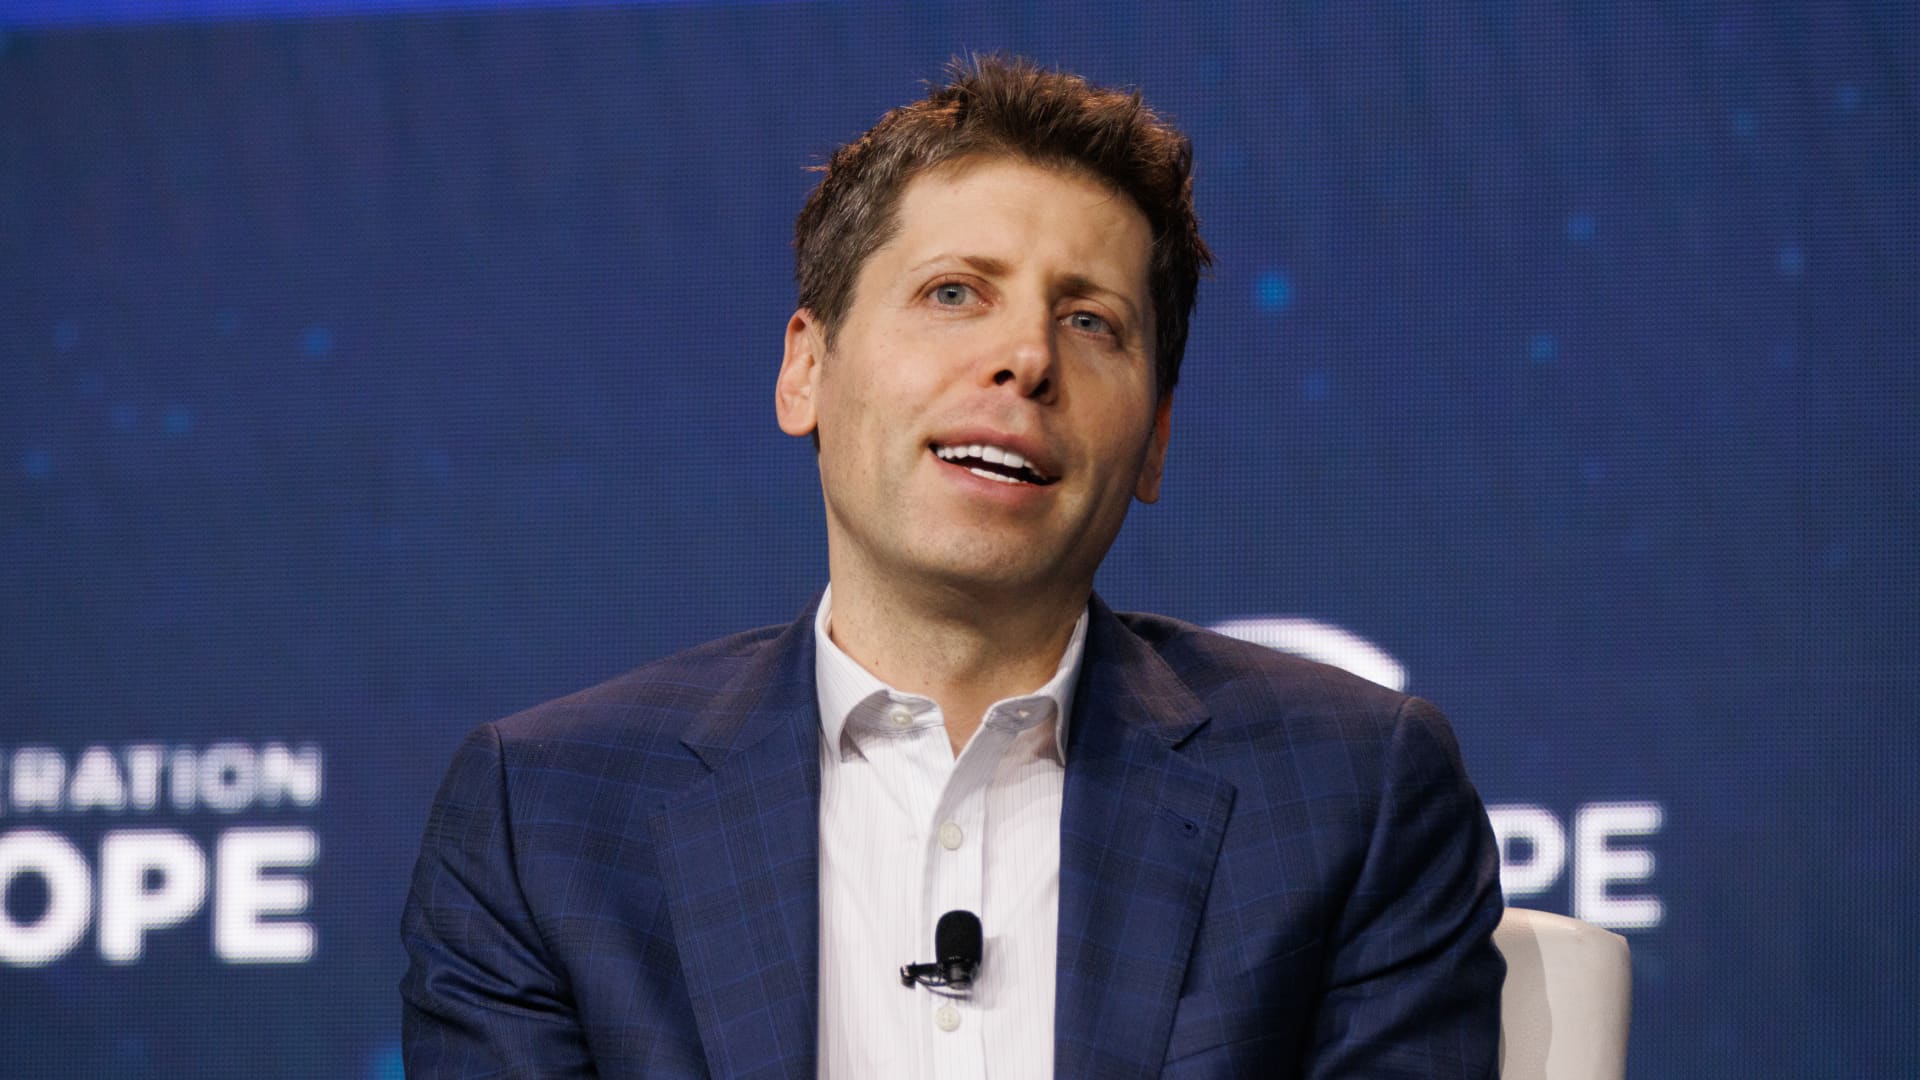 OpenAI CEO Sam Altman seeks as much as  trillion for new AI chip project: Report